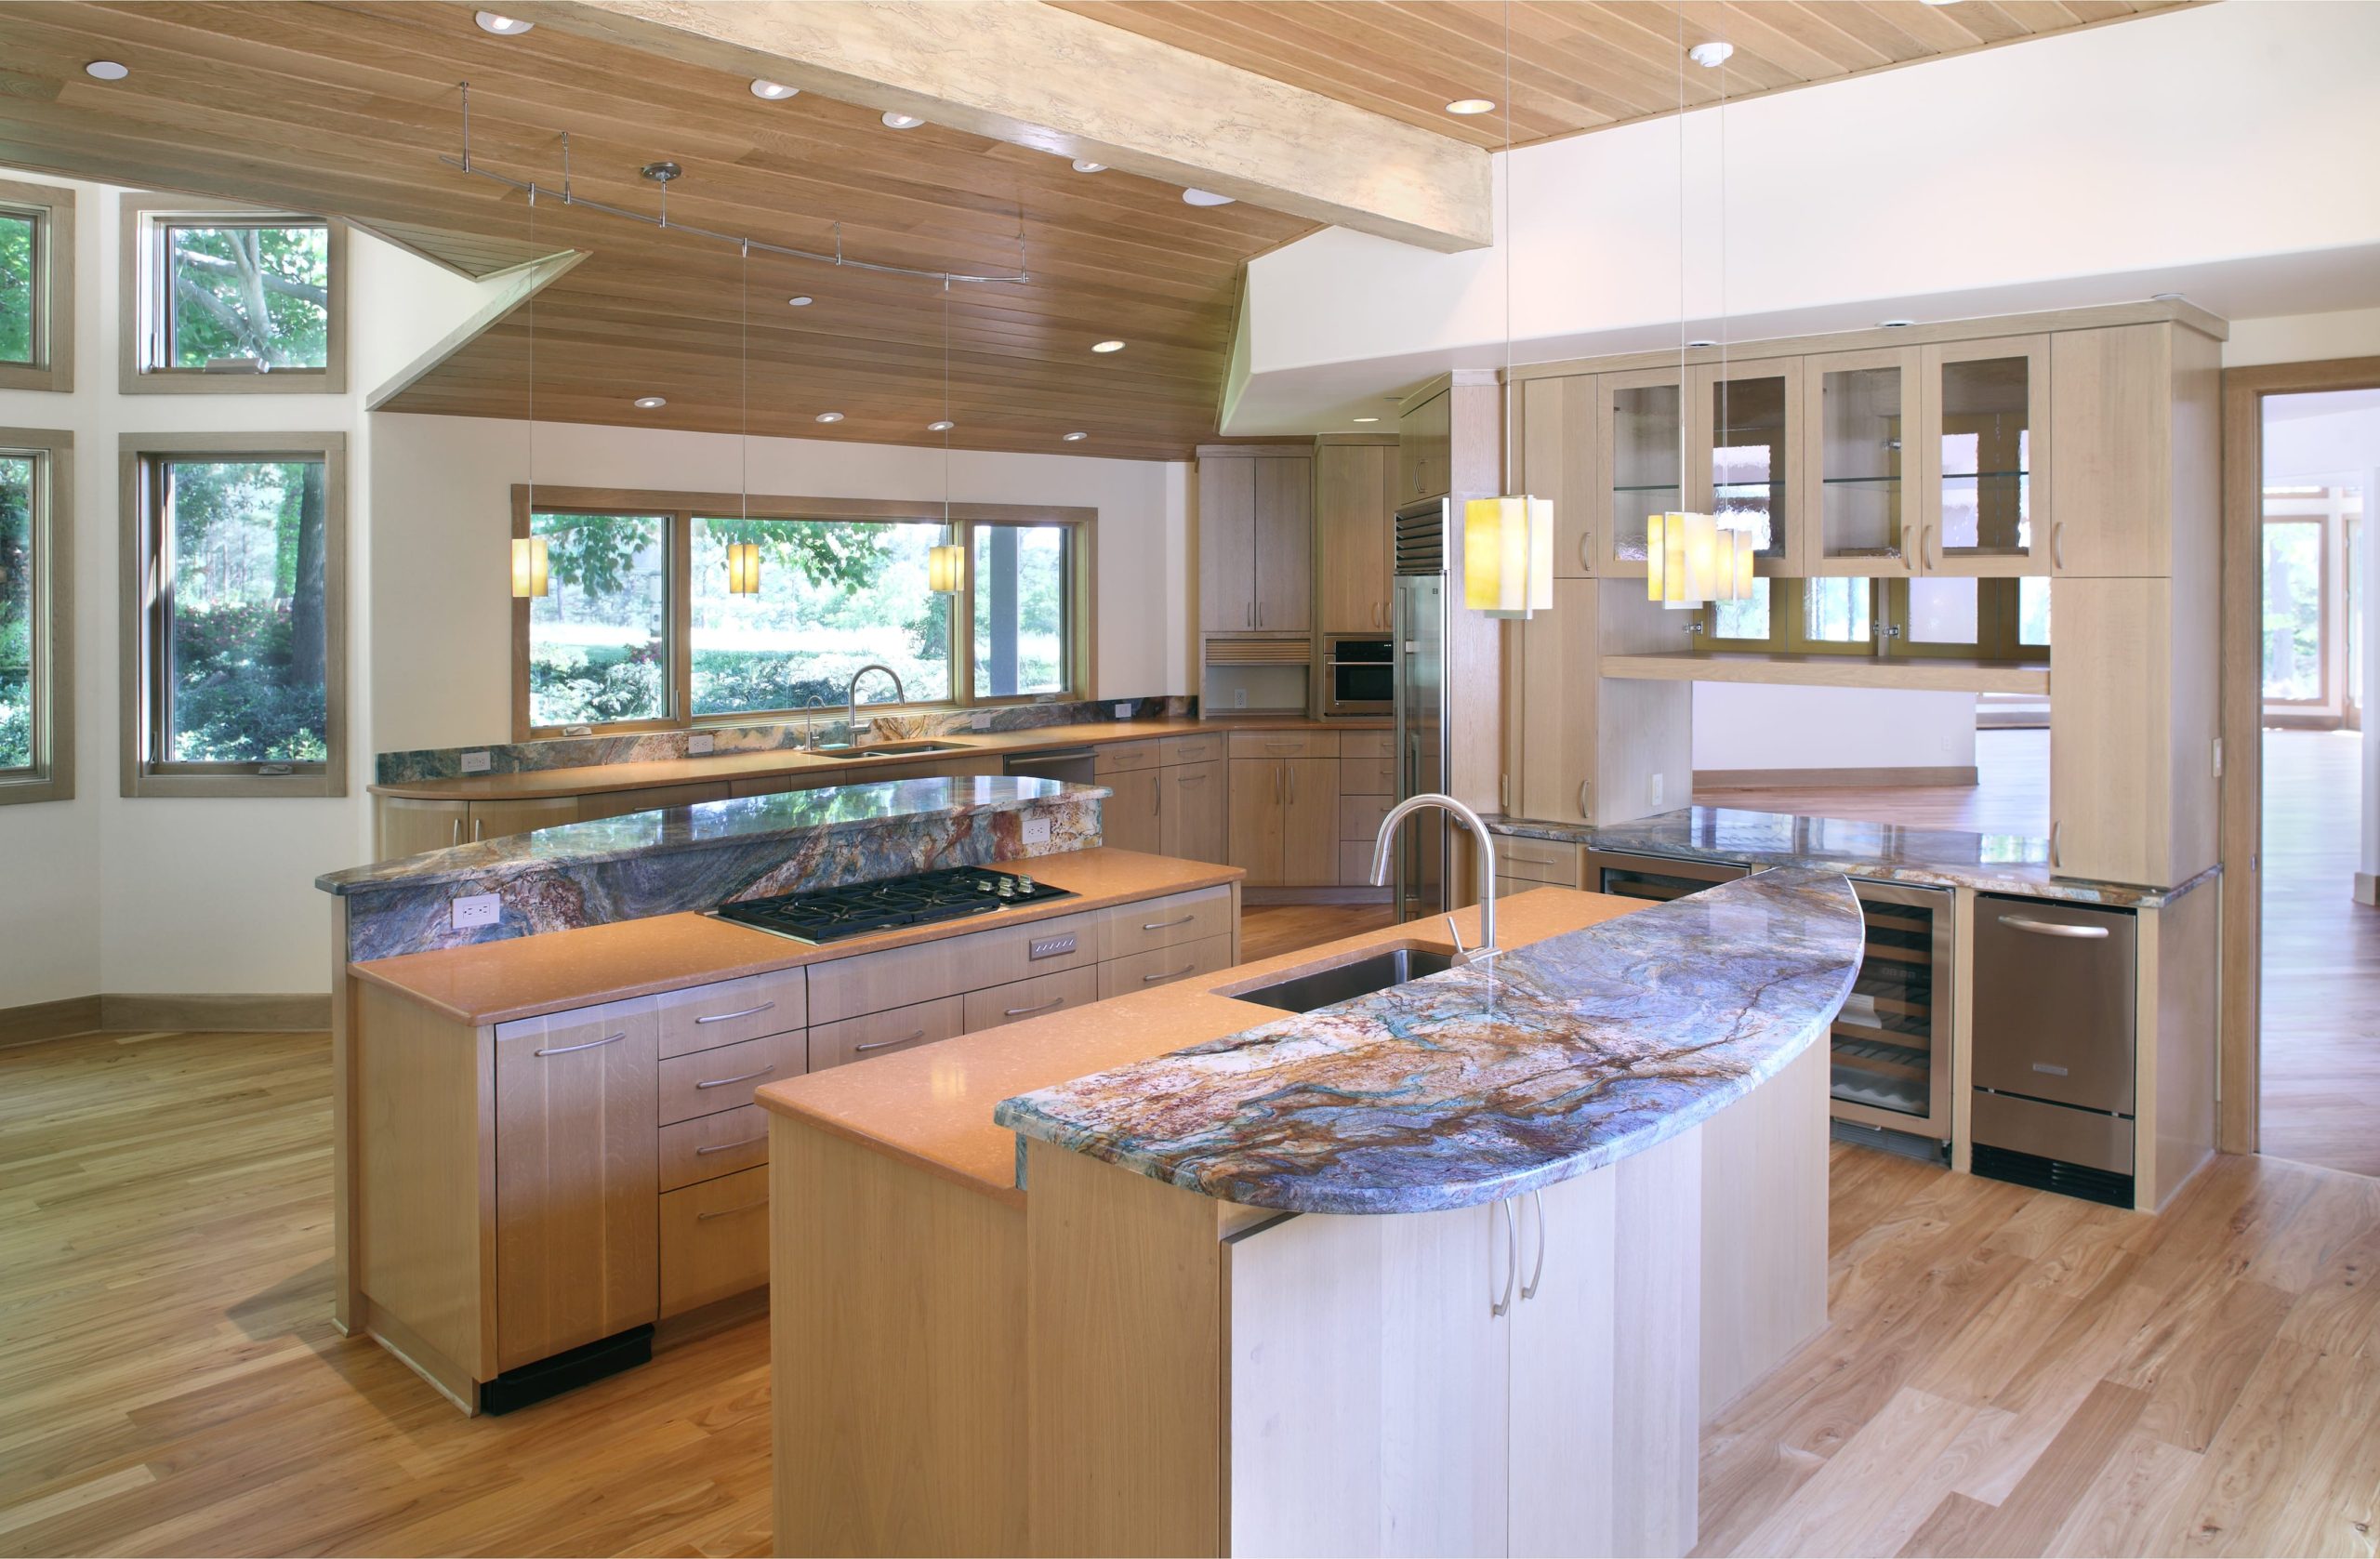 A bright and open kitchen with natural wood cabinets, stone countertops, bar seating and high ceilings occupies unique and angular spaces within the house.